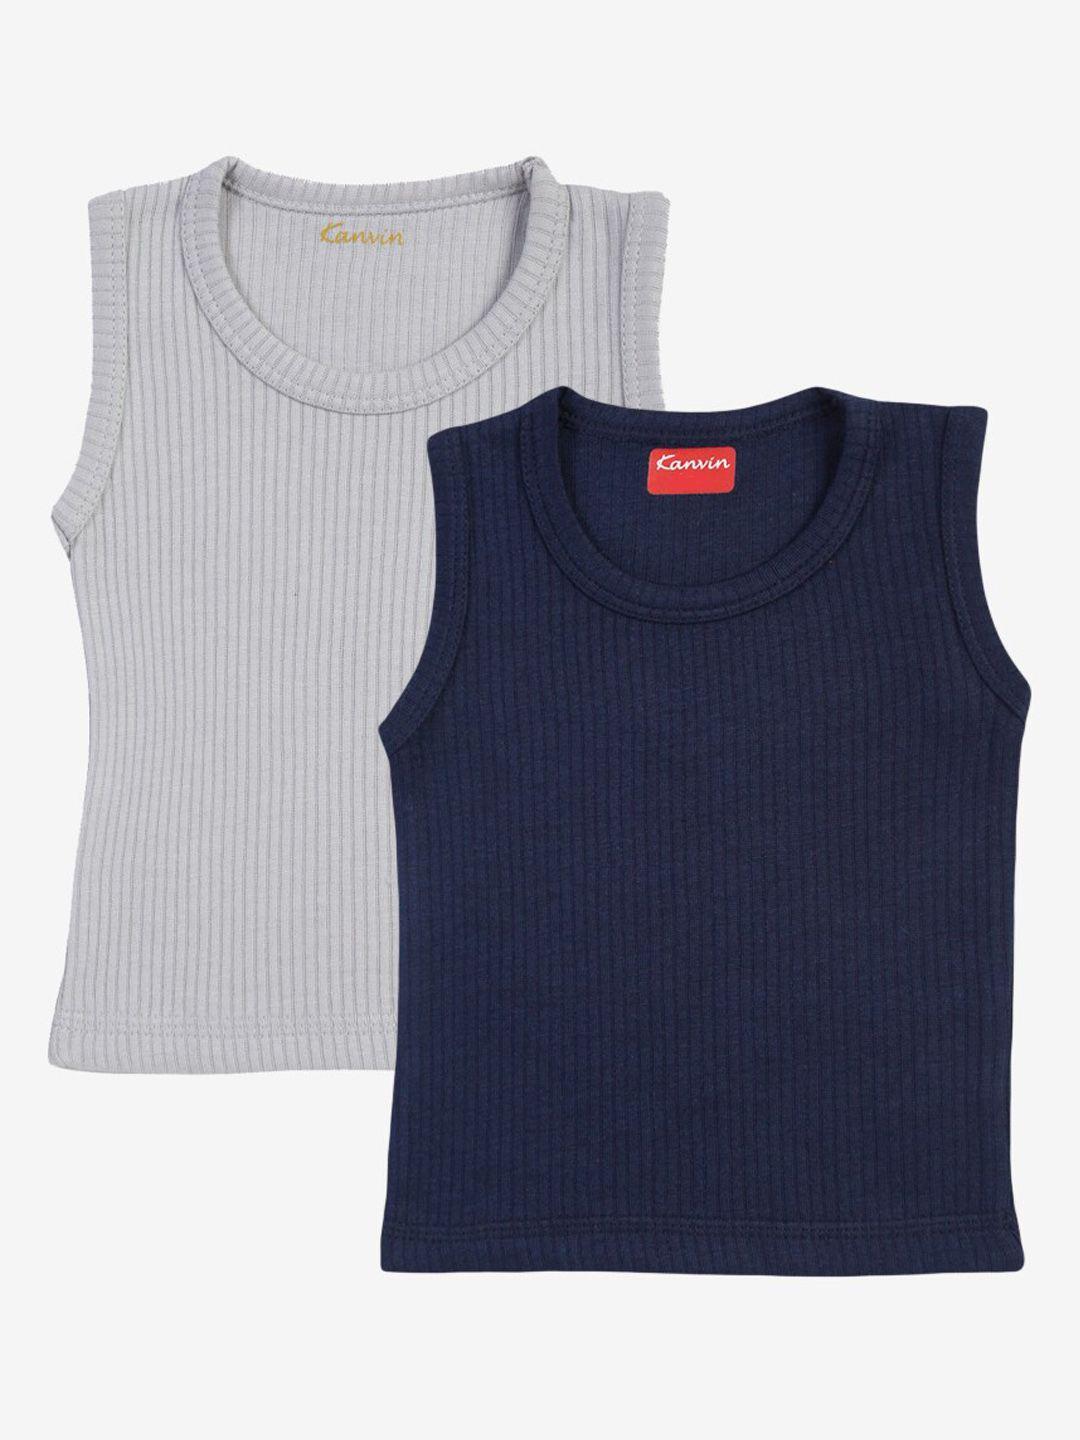 kanvin boys pack of 2 grey & navy blue ribbed  cotton thermal tops